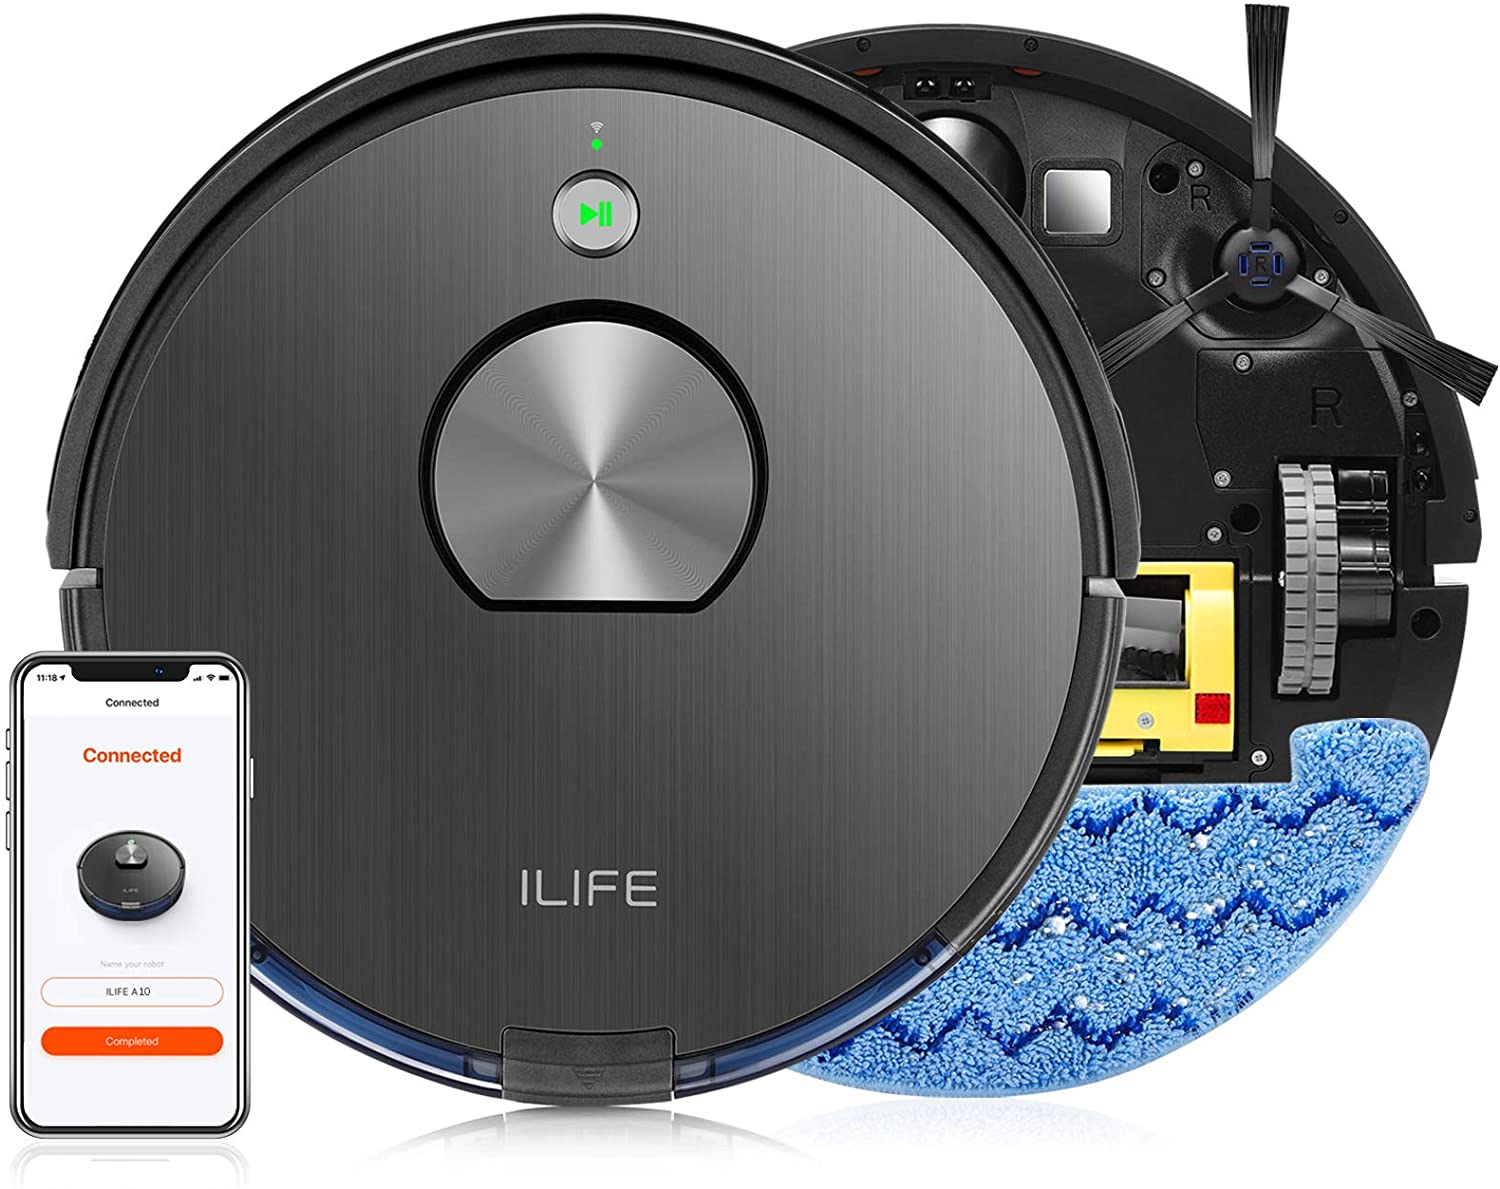 ILIFE A10 Mopping Robot Vacuum, 2-in-1 Robot Vacuum and Mop